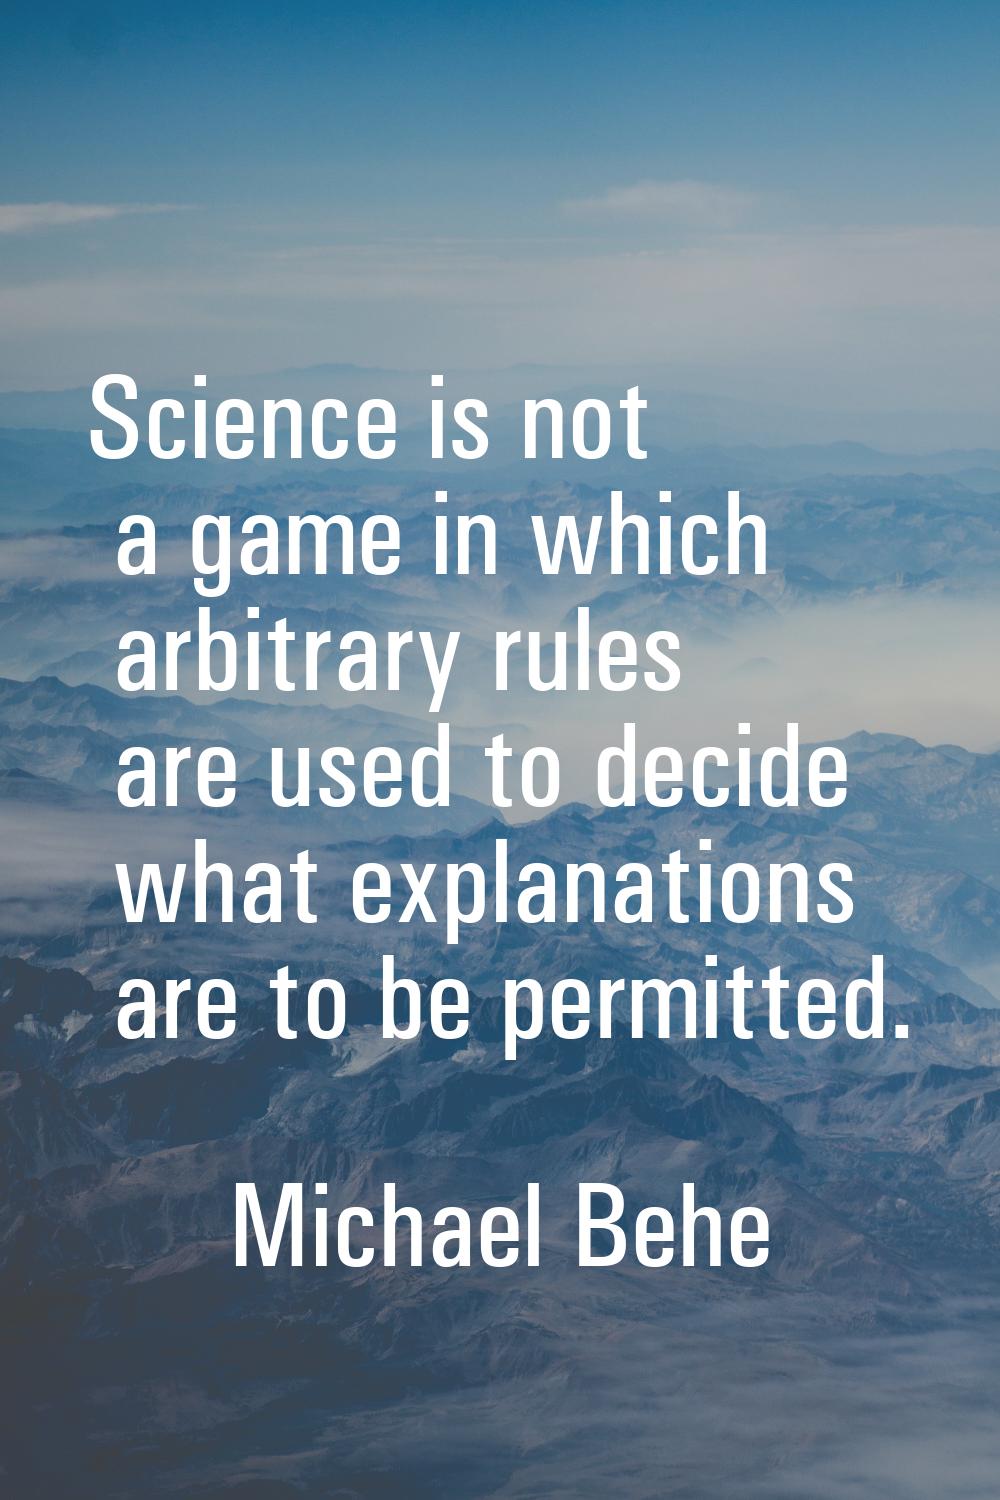 Science is not a game in which arbitrary rules are used to decide what explanations are to be permi